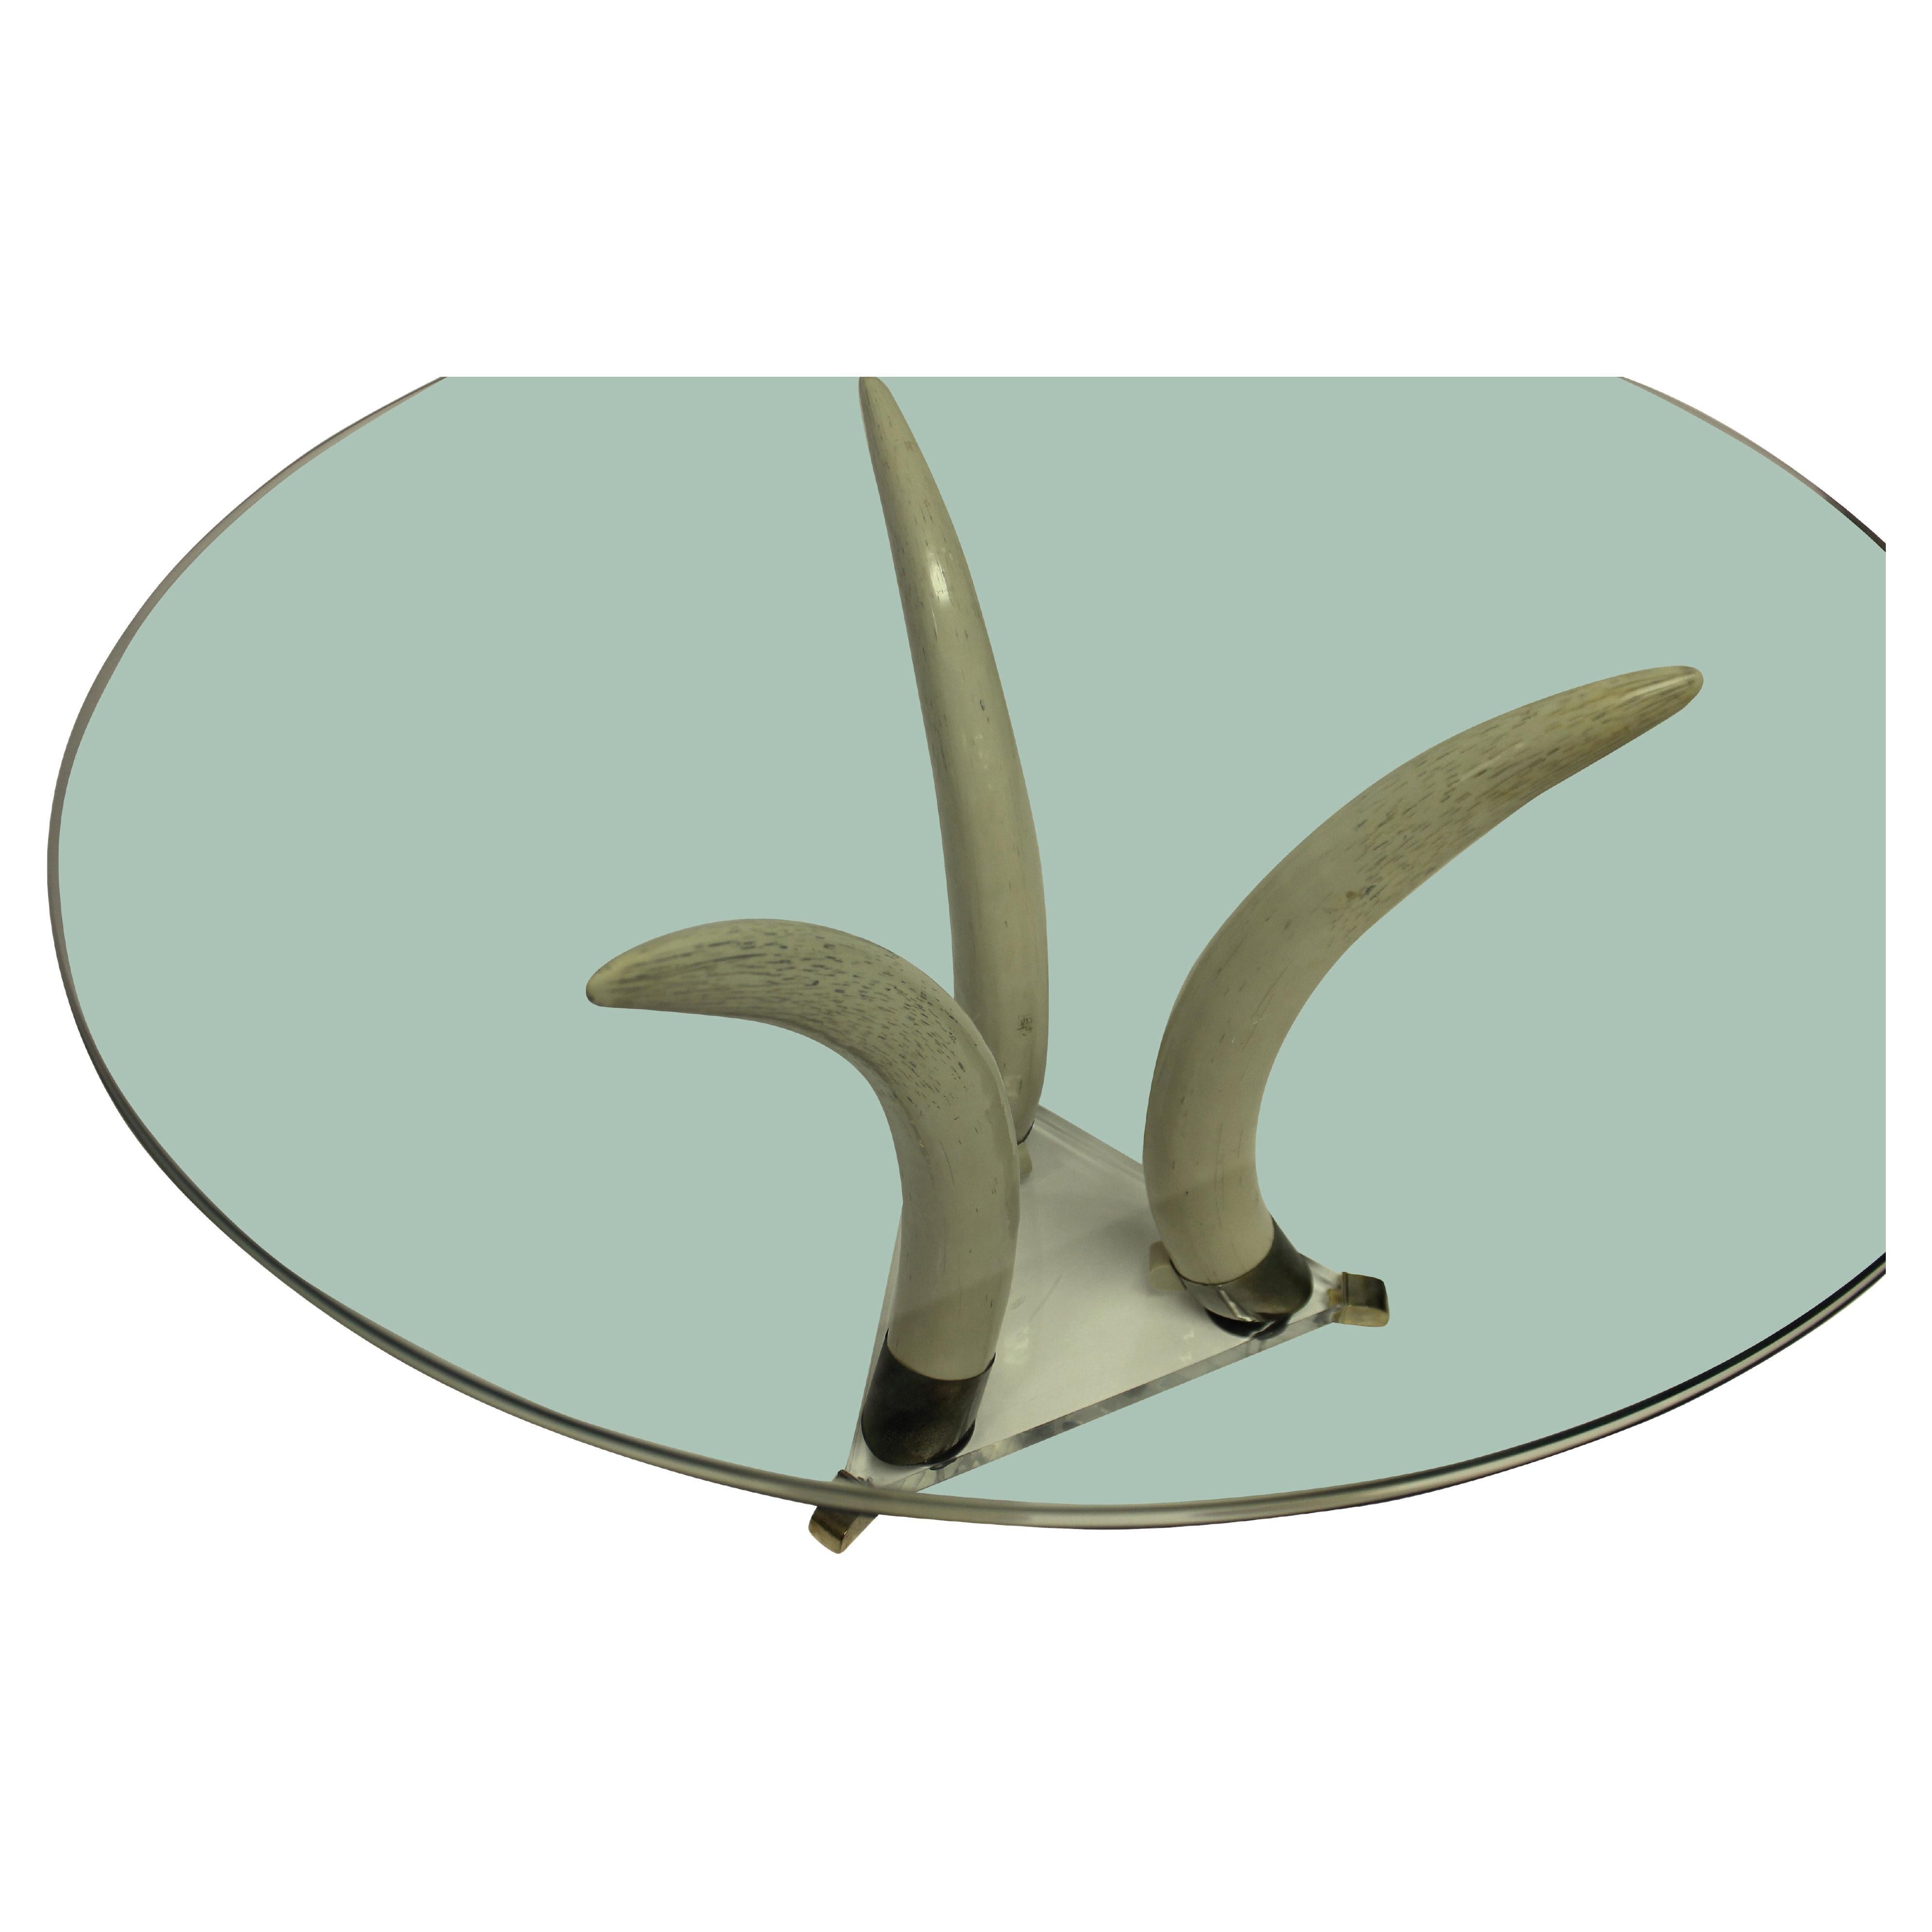 A French mid-century faux tusk centre table. On an acrylic triangular base with brass feet, the three life like tusks, supporting a circular clear plate glass top.